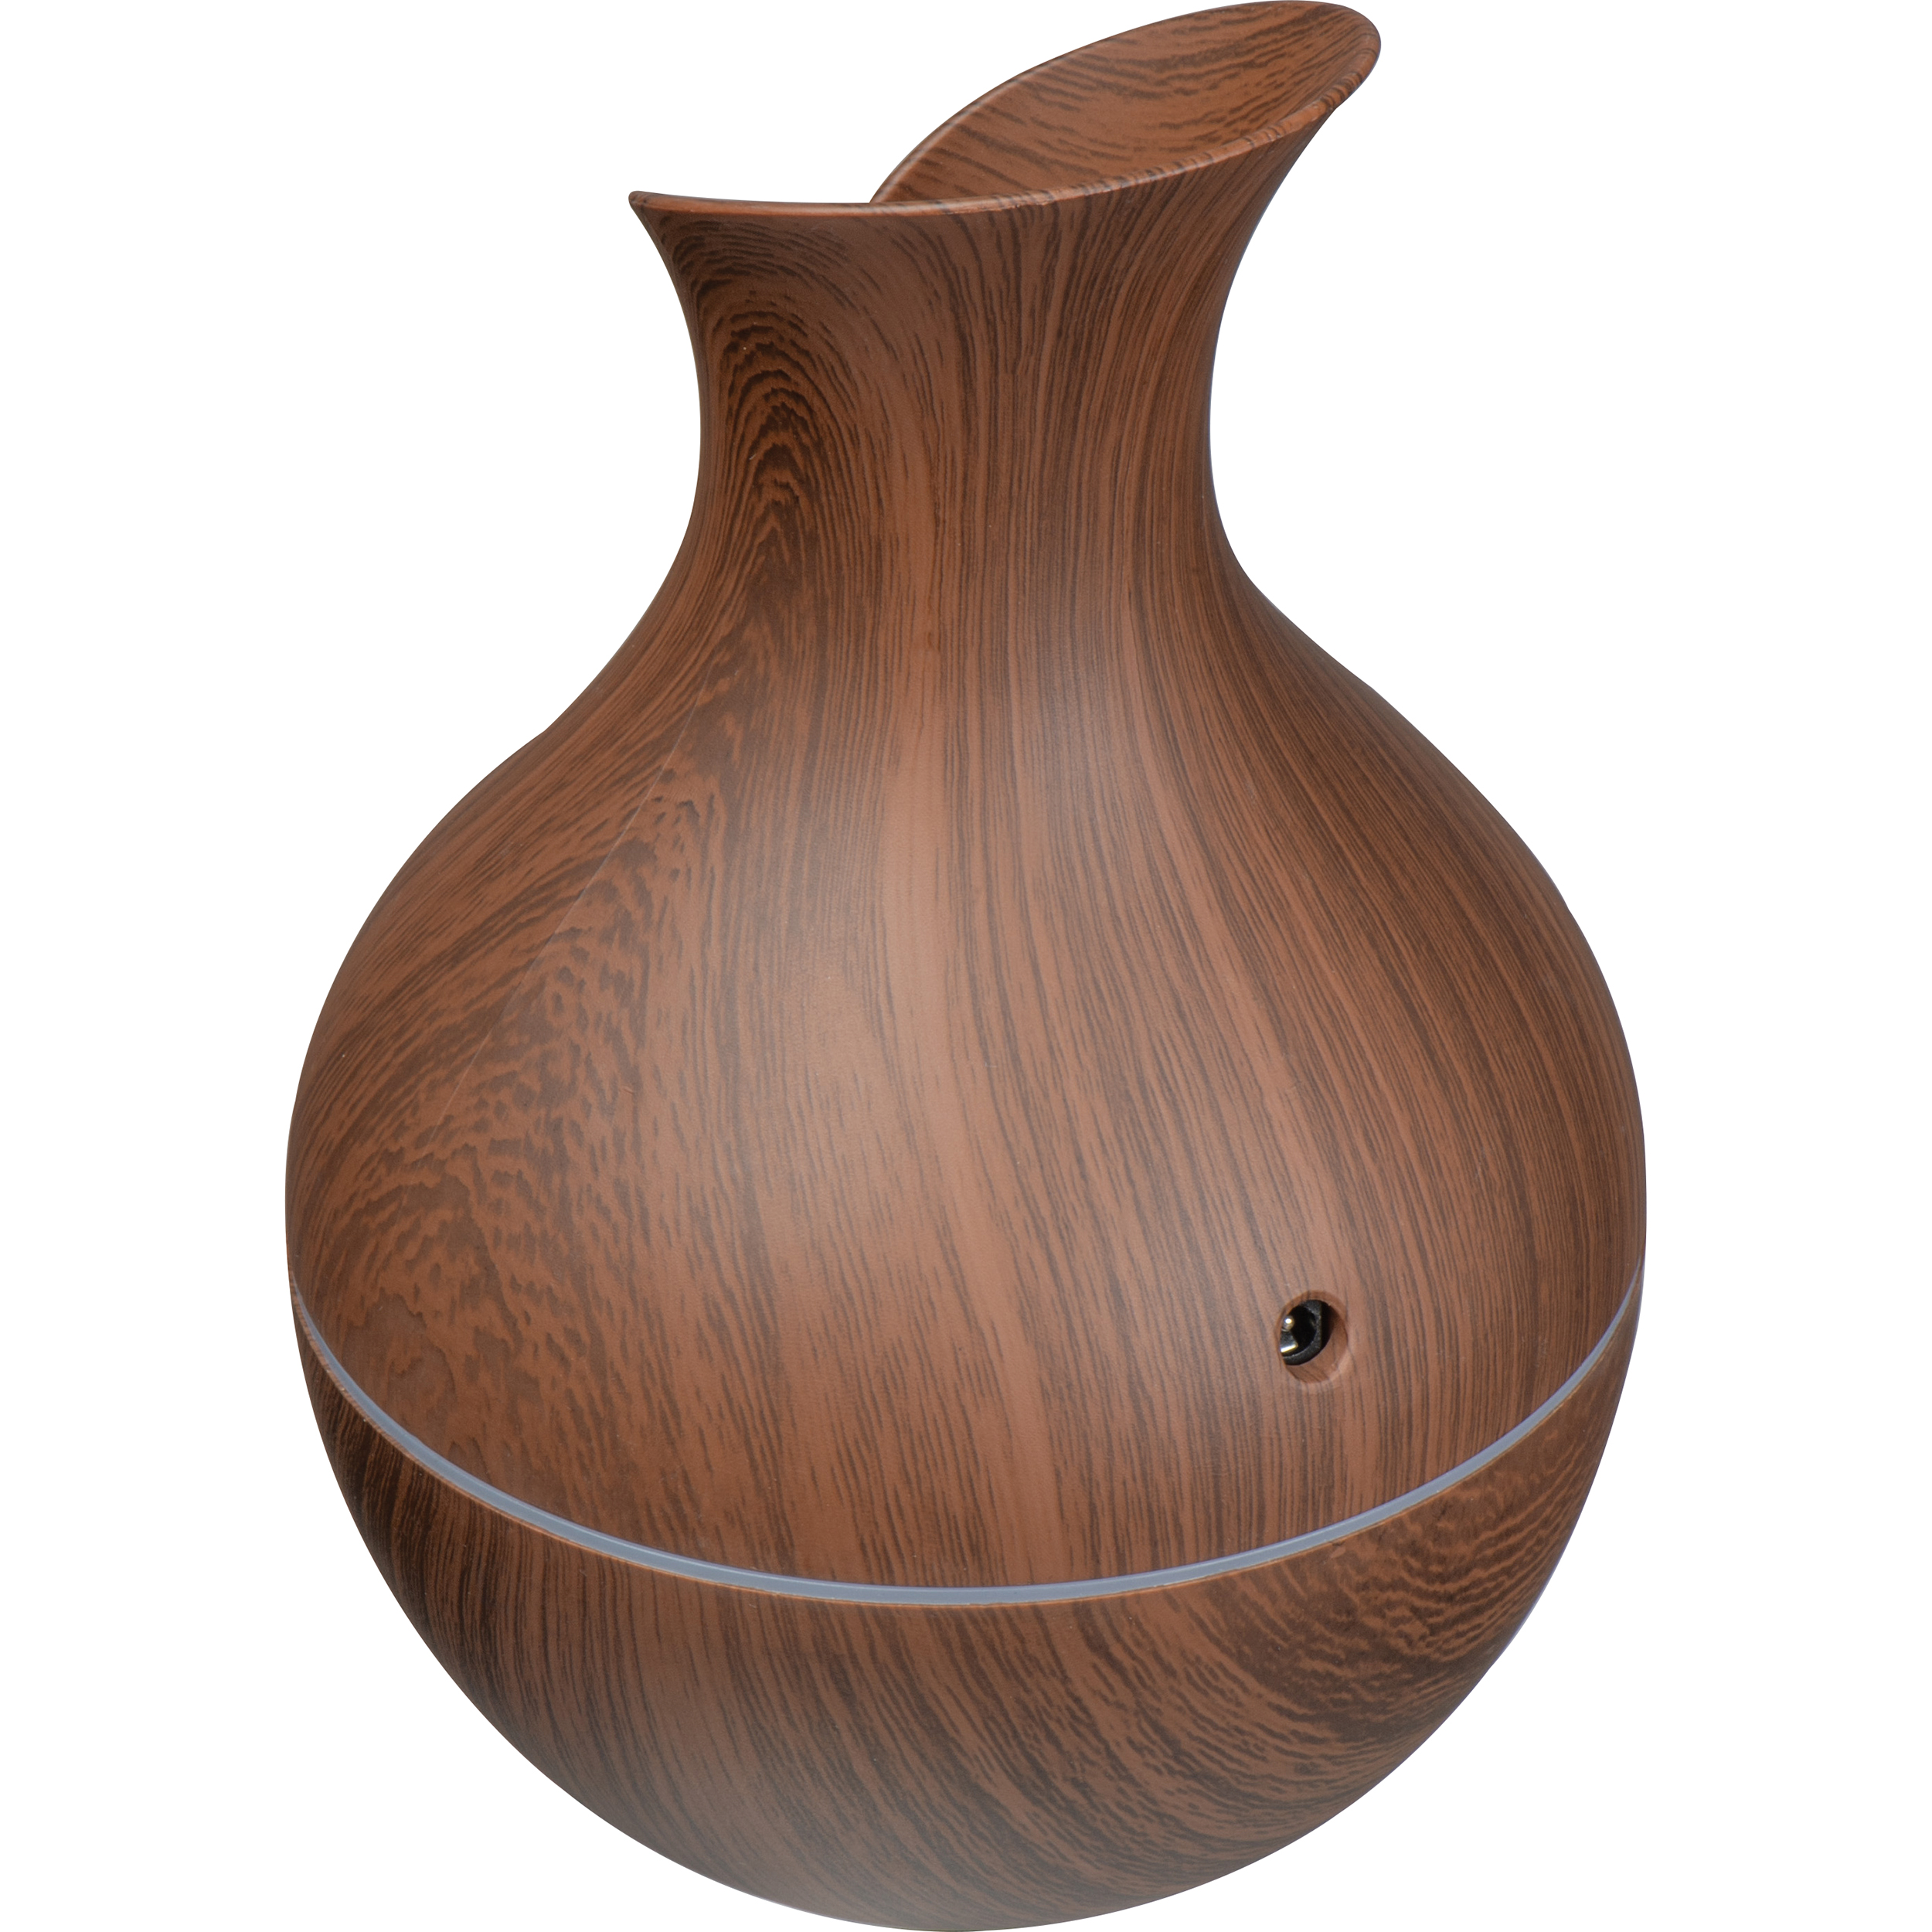 Humidifier with a dark wood appearance - Great Oakley